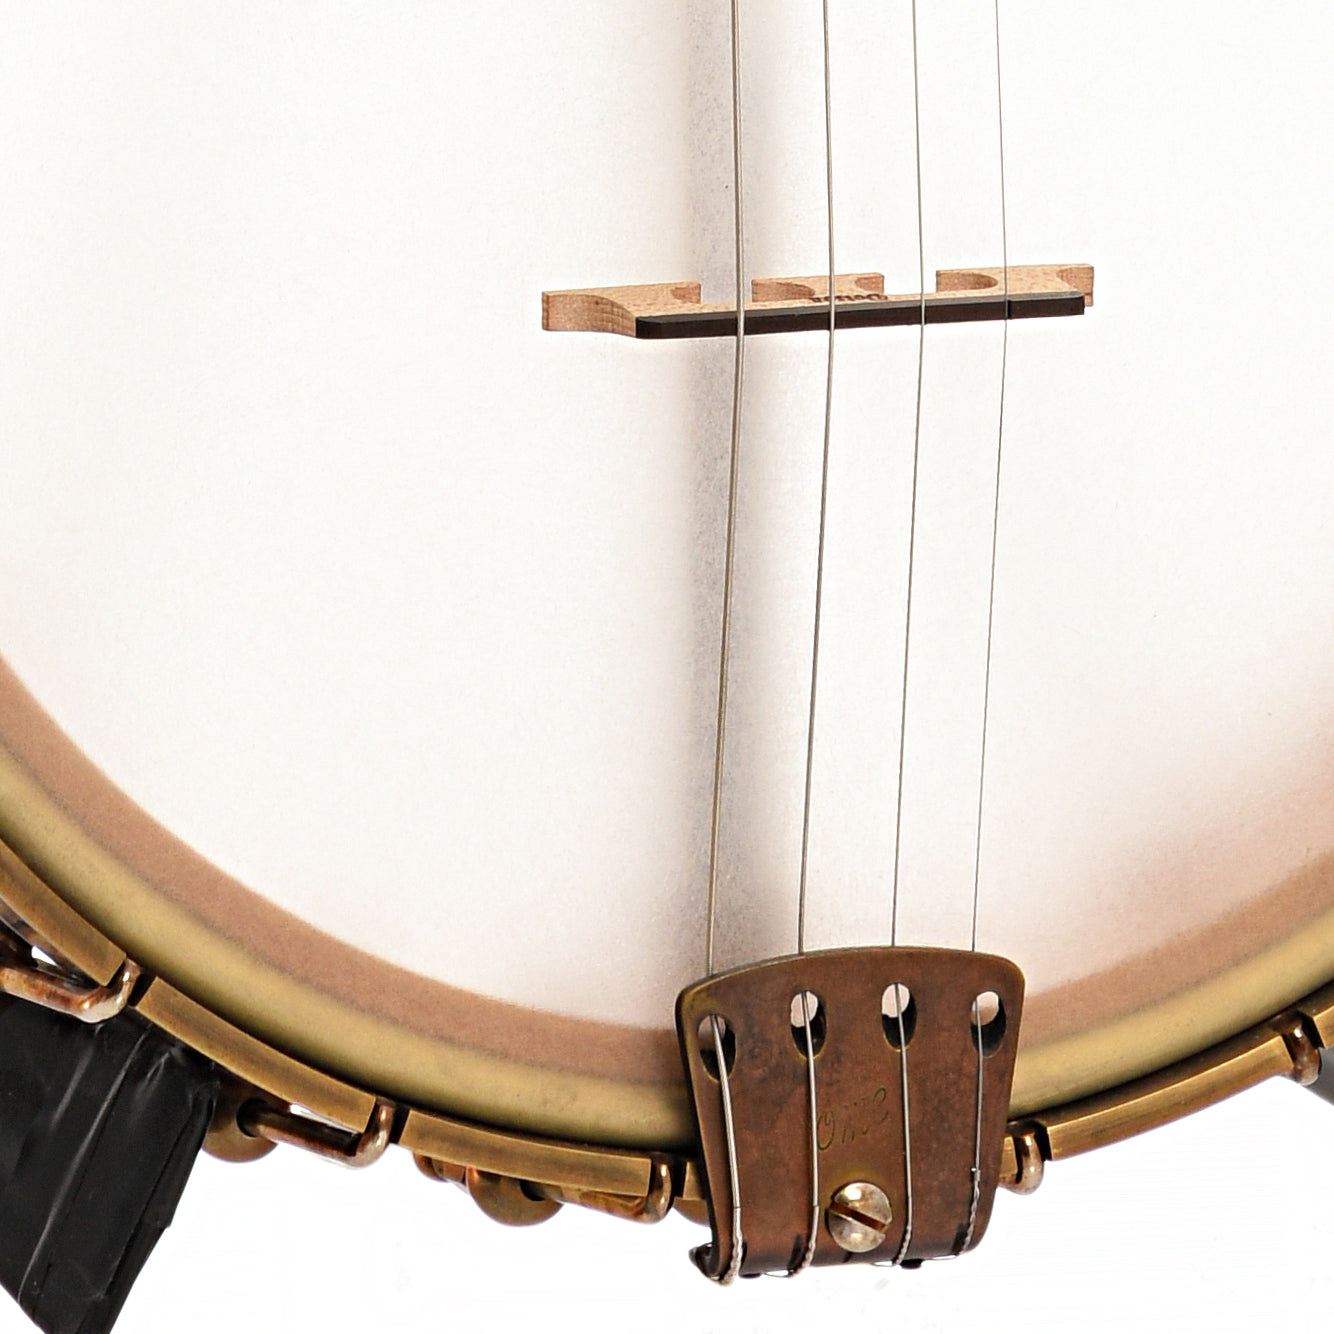 Tailpiece and bridge of Ome Sweetgrass 11" Tenor Banjo & Gigbag - Curly Maple